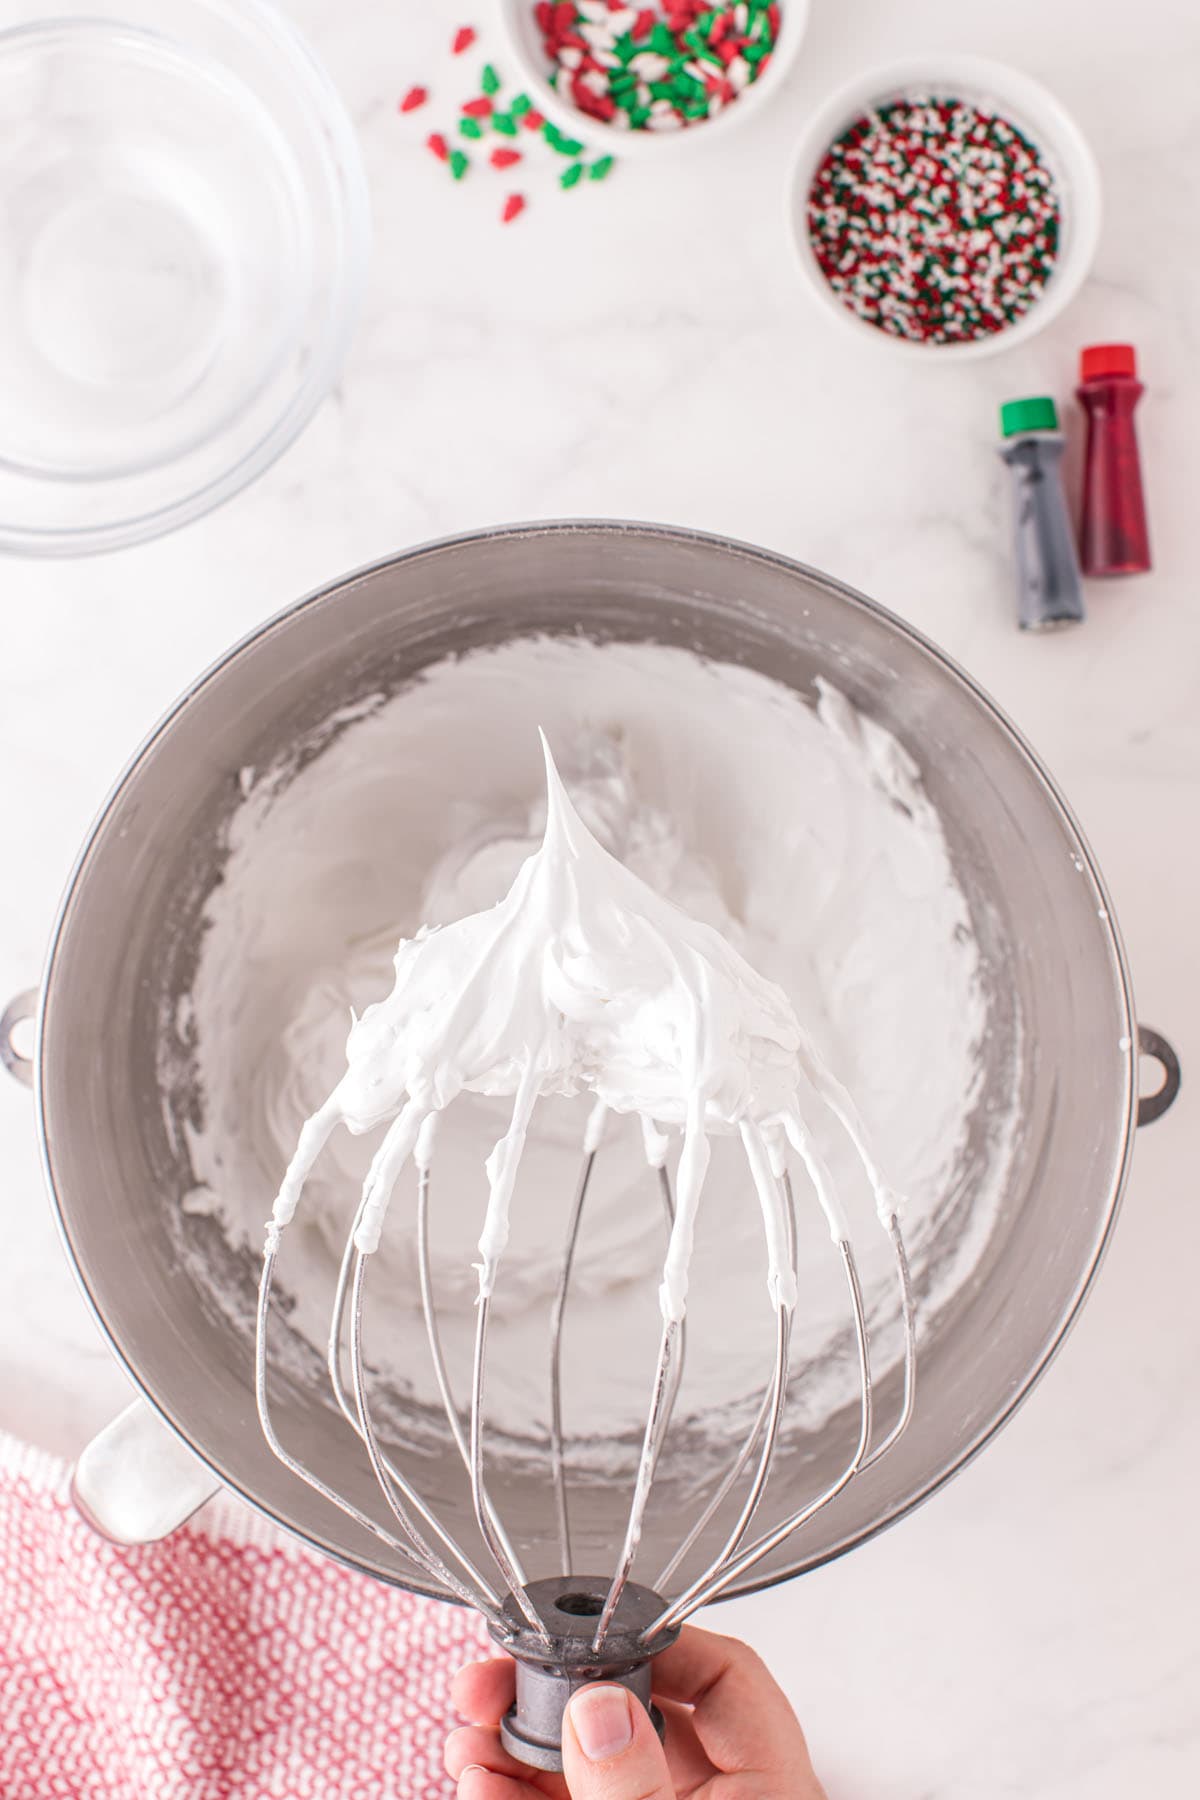 Add in powdered sugar into the mixture